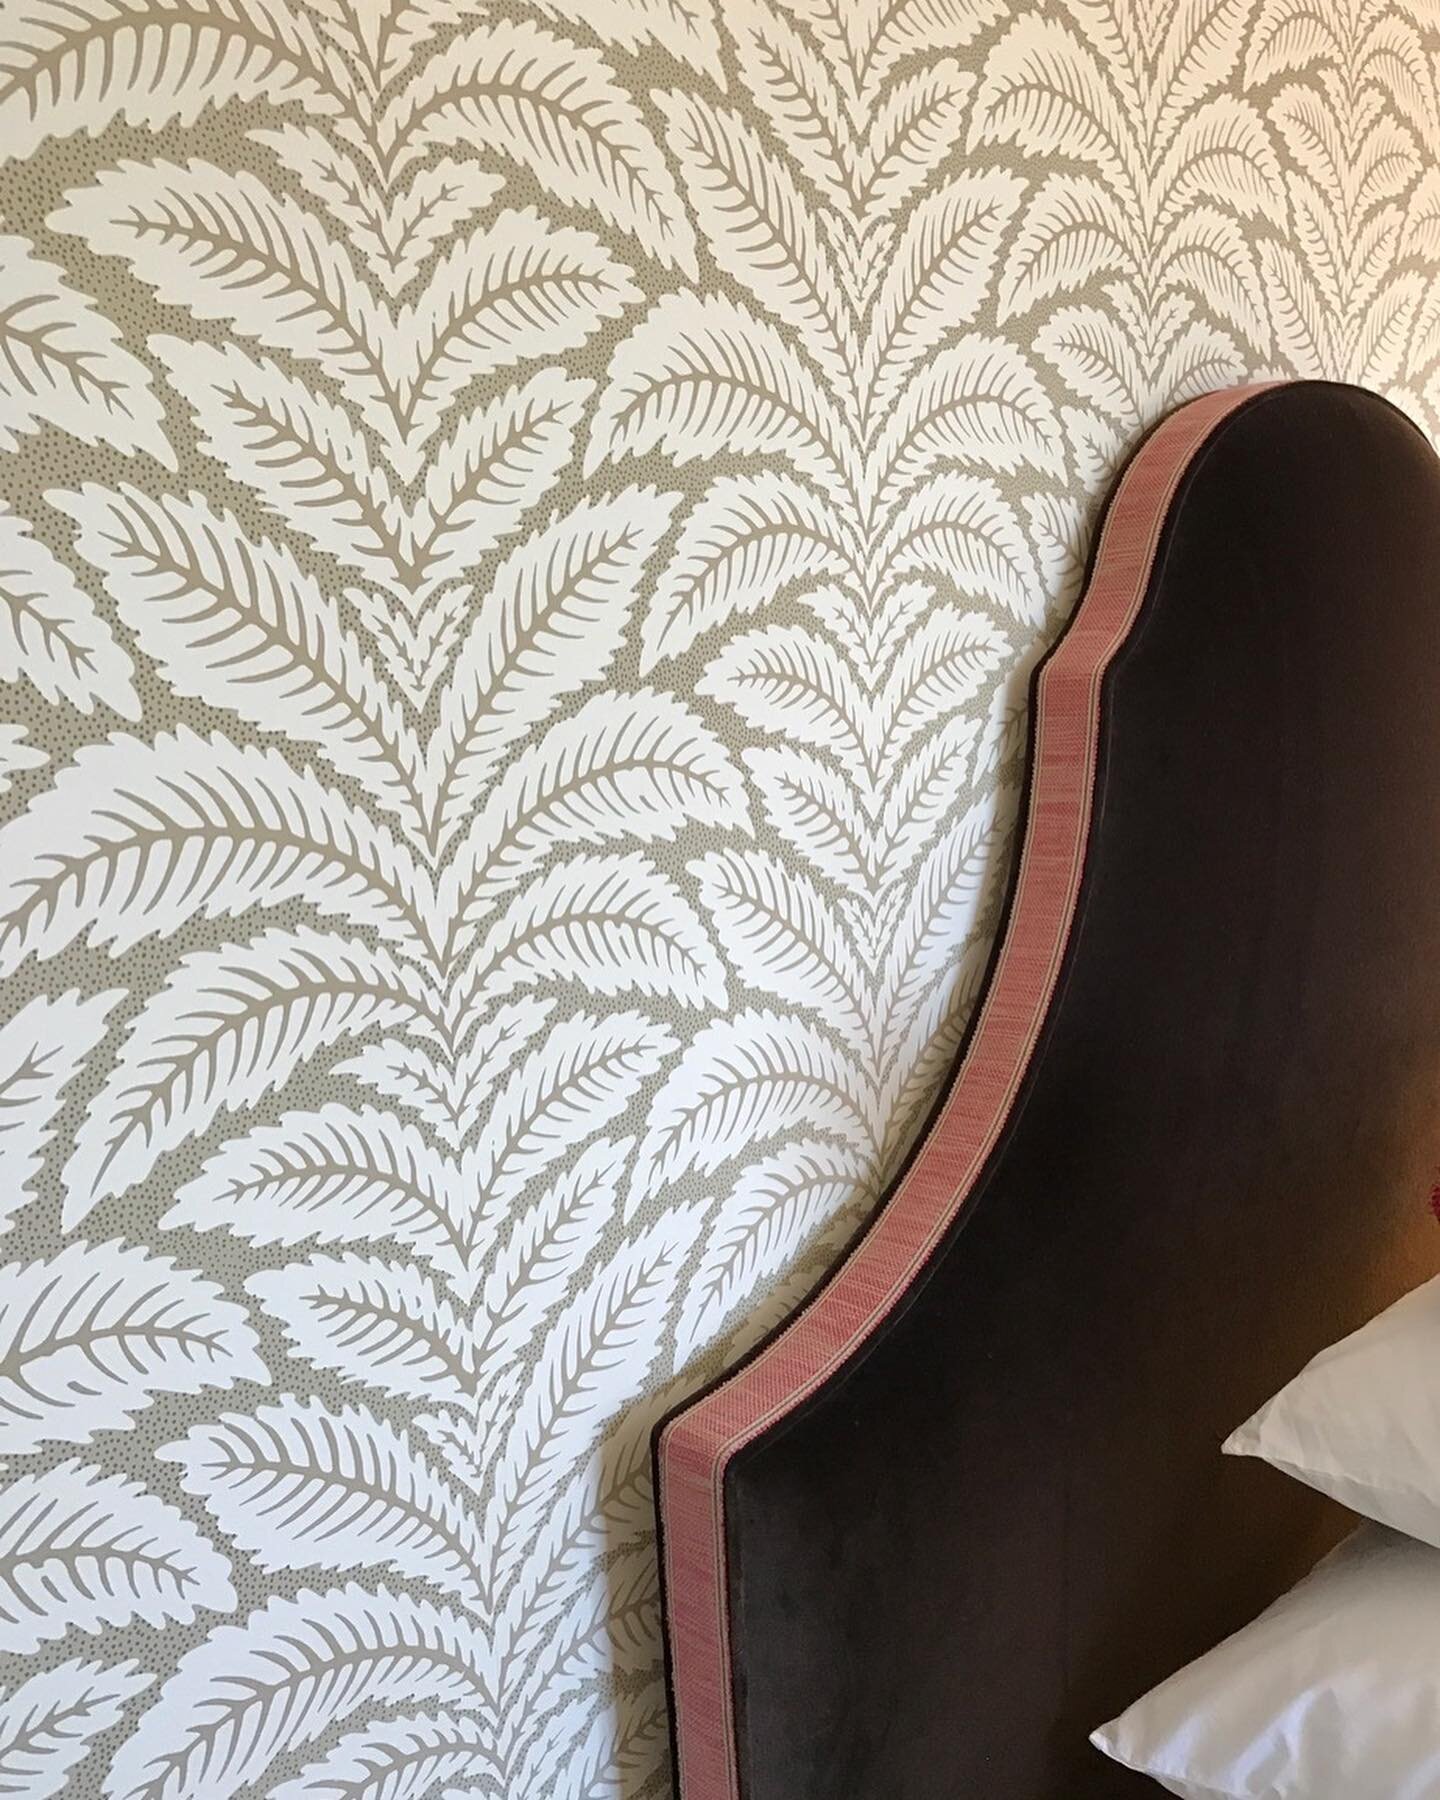 Today we are thinking about #wallpaper and our teams who work so hard to install it so beautifully &hellip; the first photo a particular favorite of mine for so many reasons #traditionalbutnot #details #lovemyclients #lovemyteams #wallpaperwednesday 